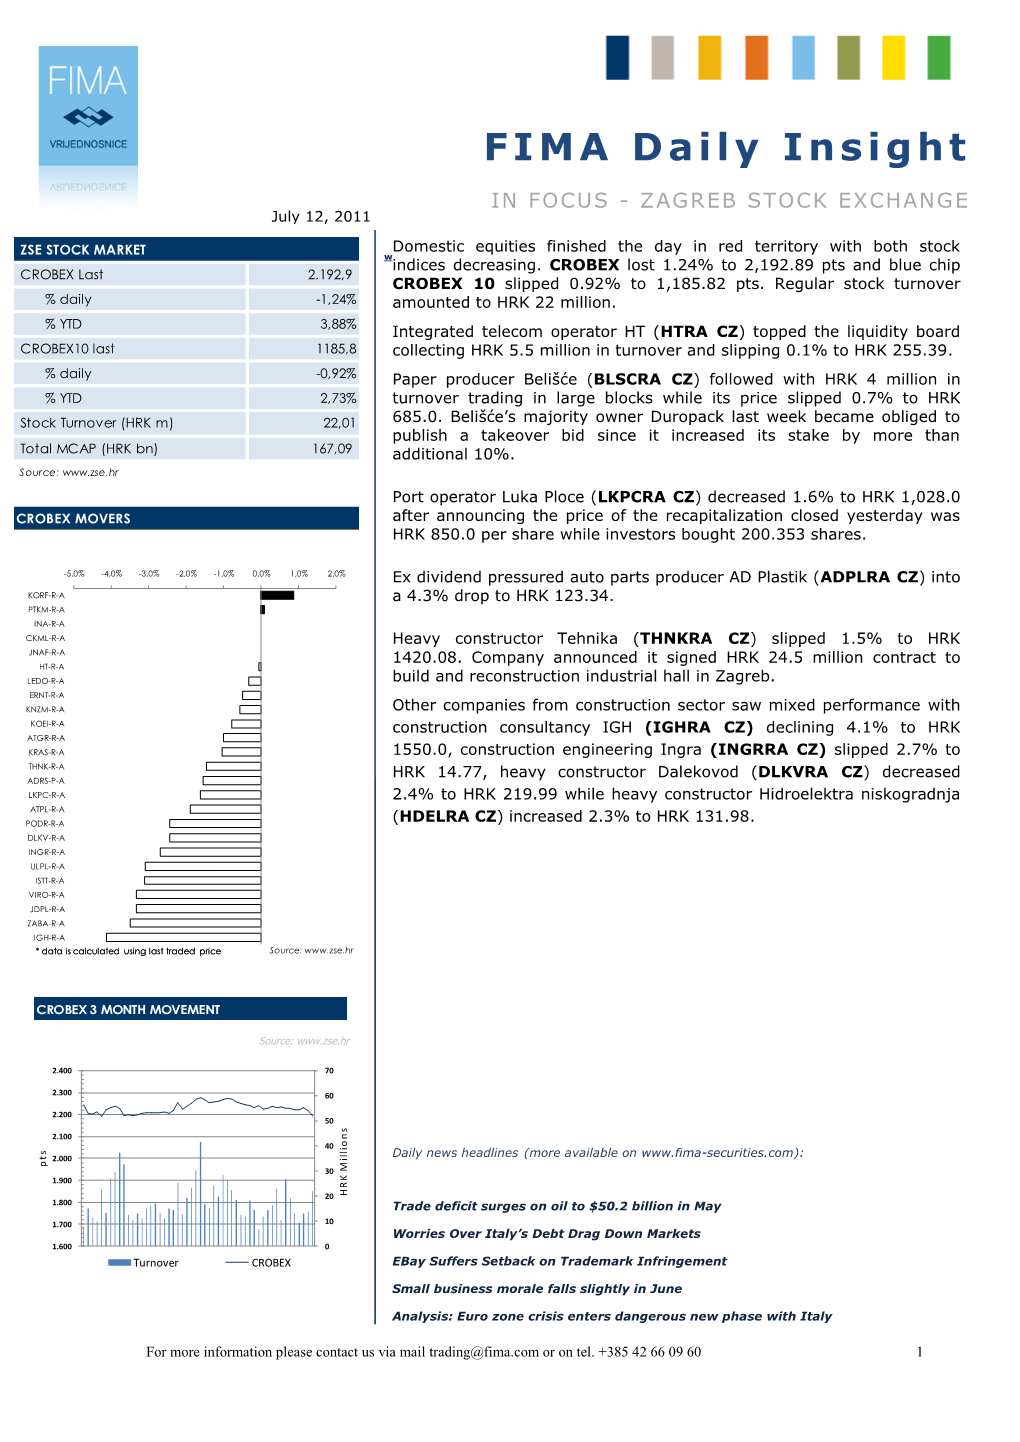 FIMA Daily Insight Is a Daily Publication of FIMA Securities Ltd